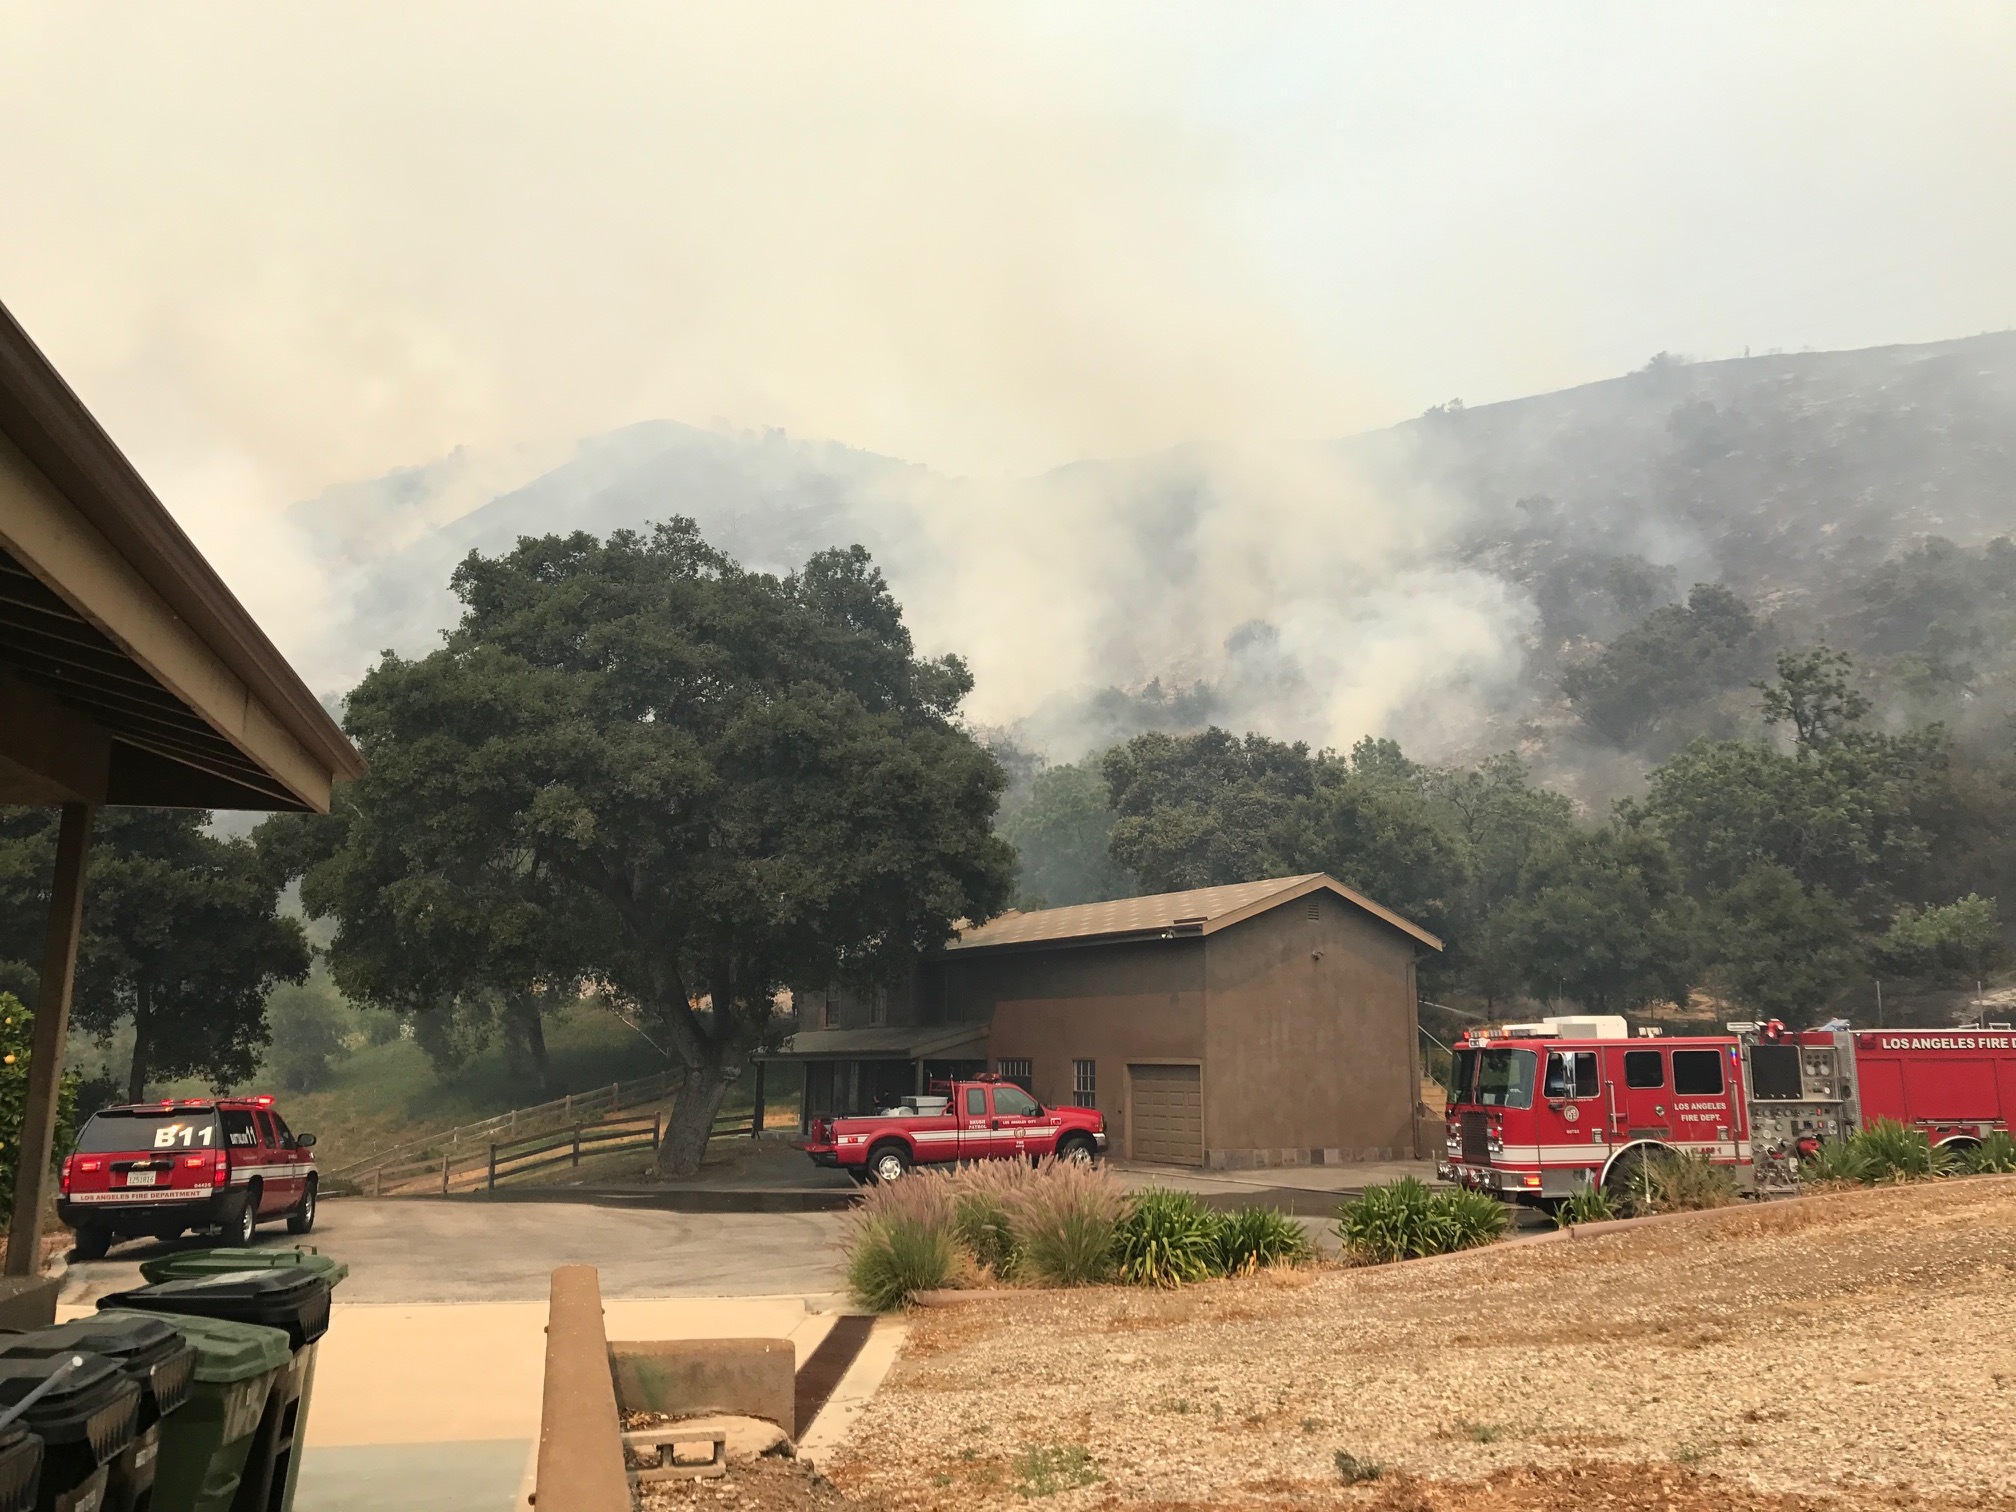 Fire engines defending home against approaching brush fire